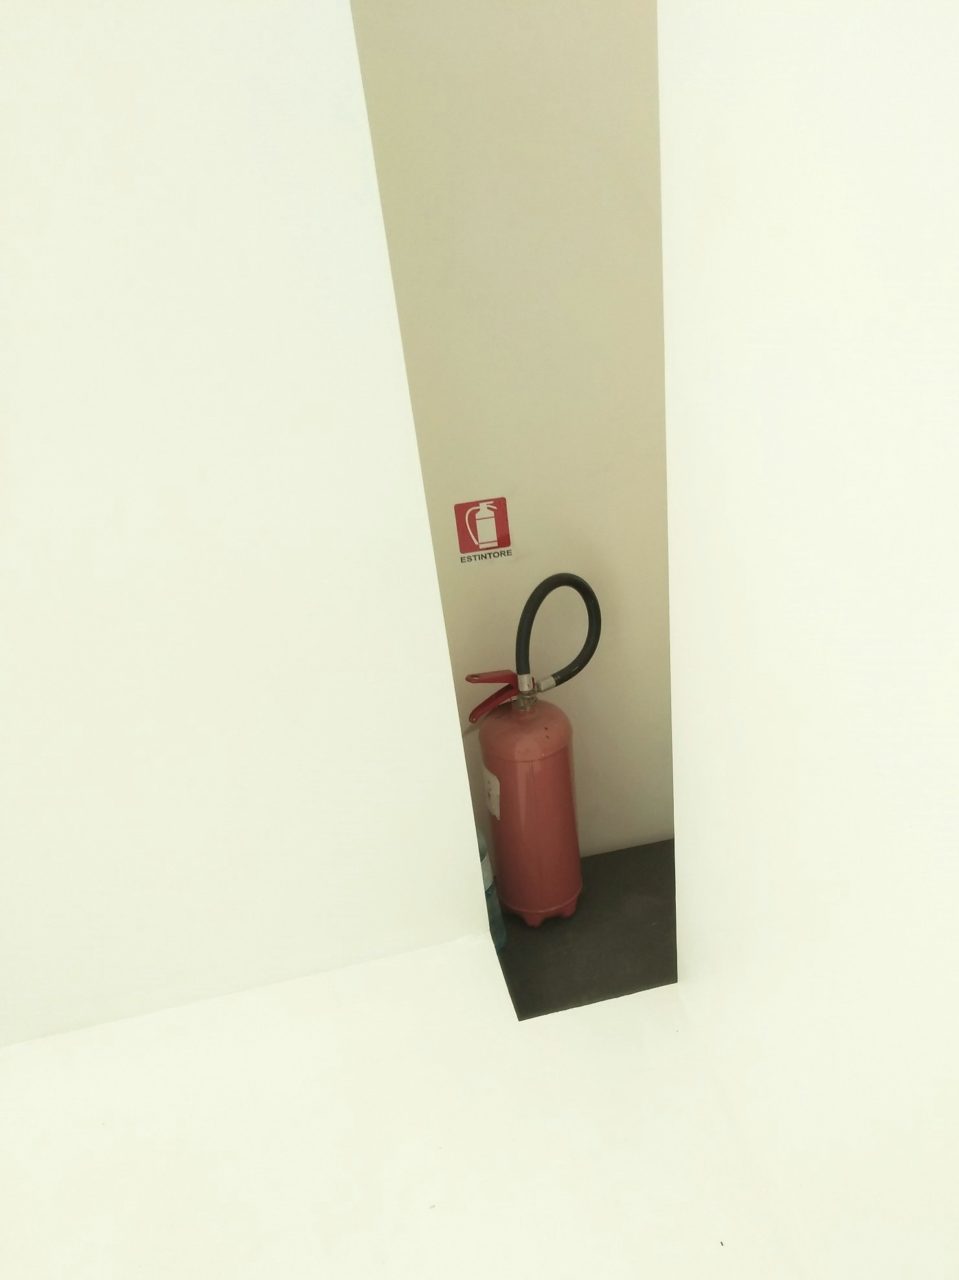 Untitled 480, metal and plastic fire extinguisher with paper label, laminated estintore (fire extinguisher) sign, plastic water bottle, white emulsion, 2019, NFS